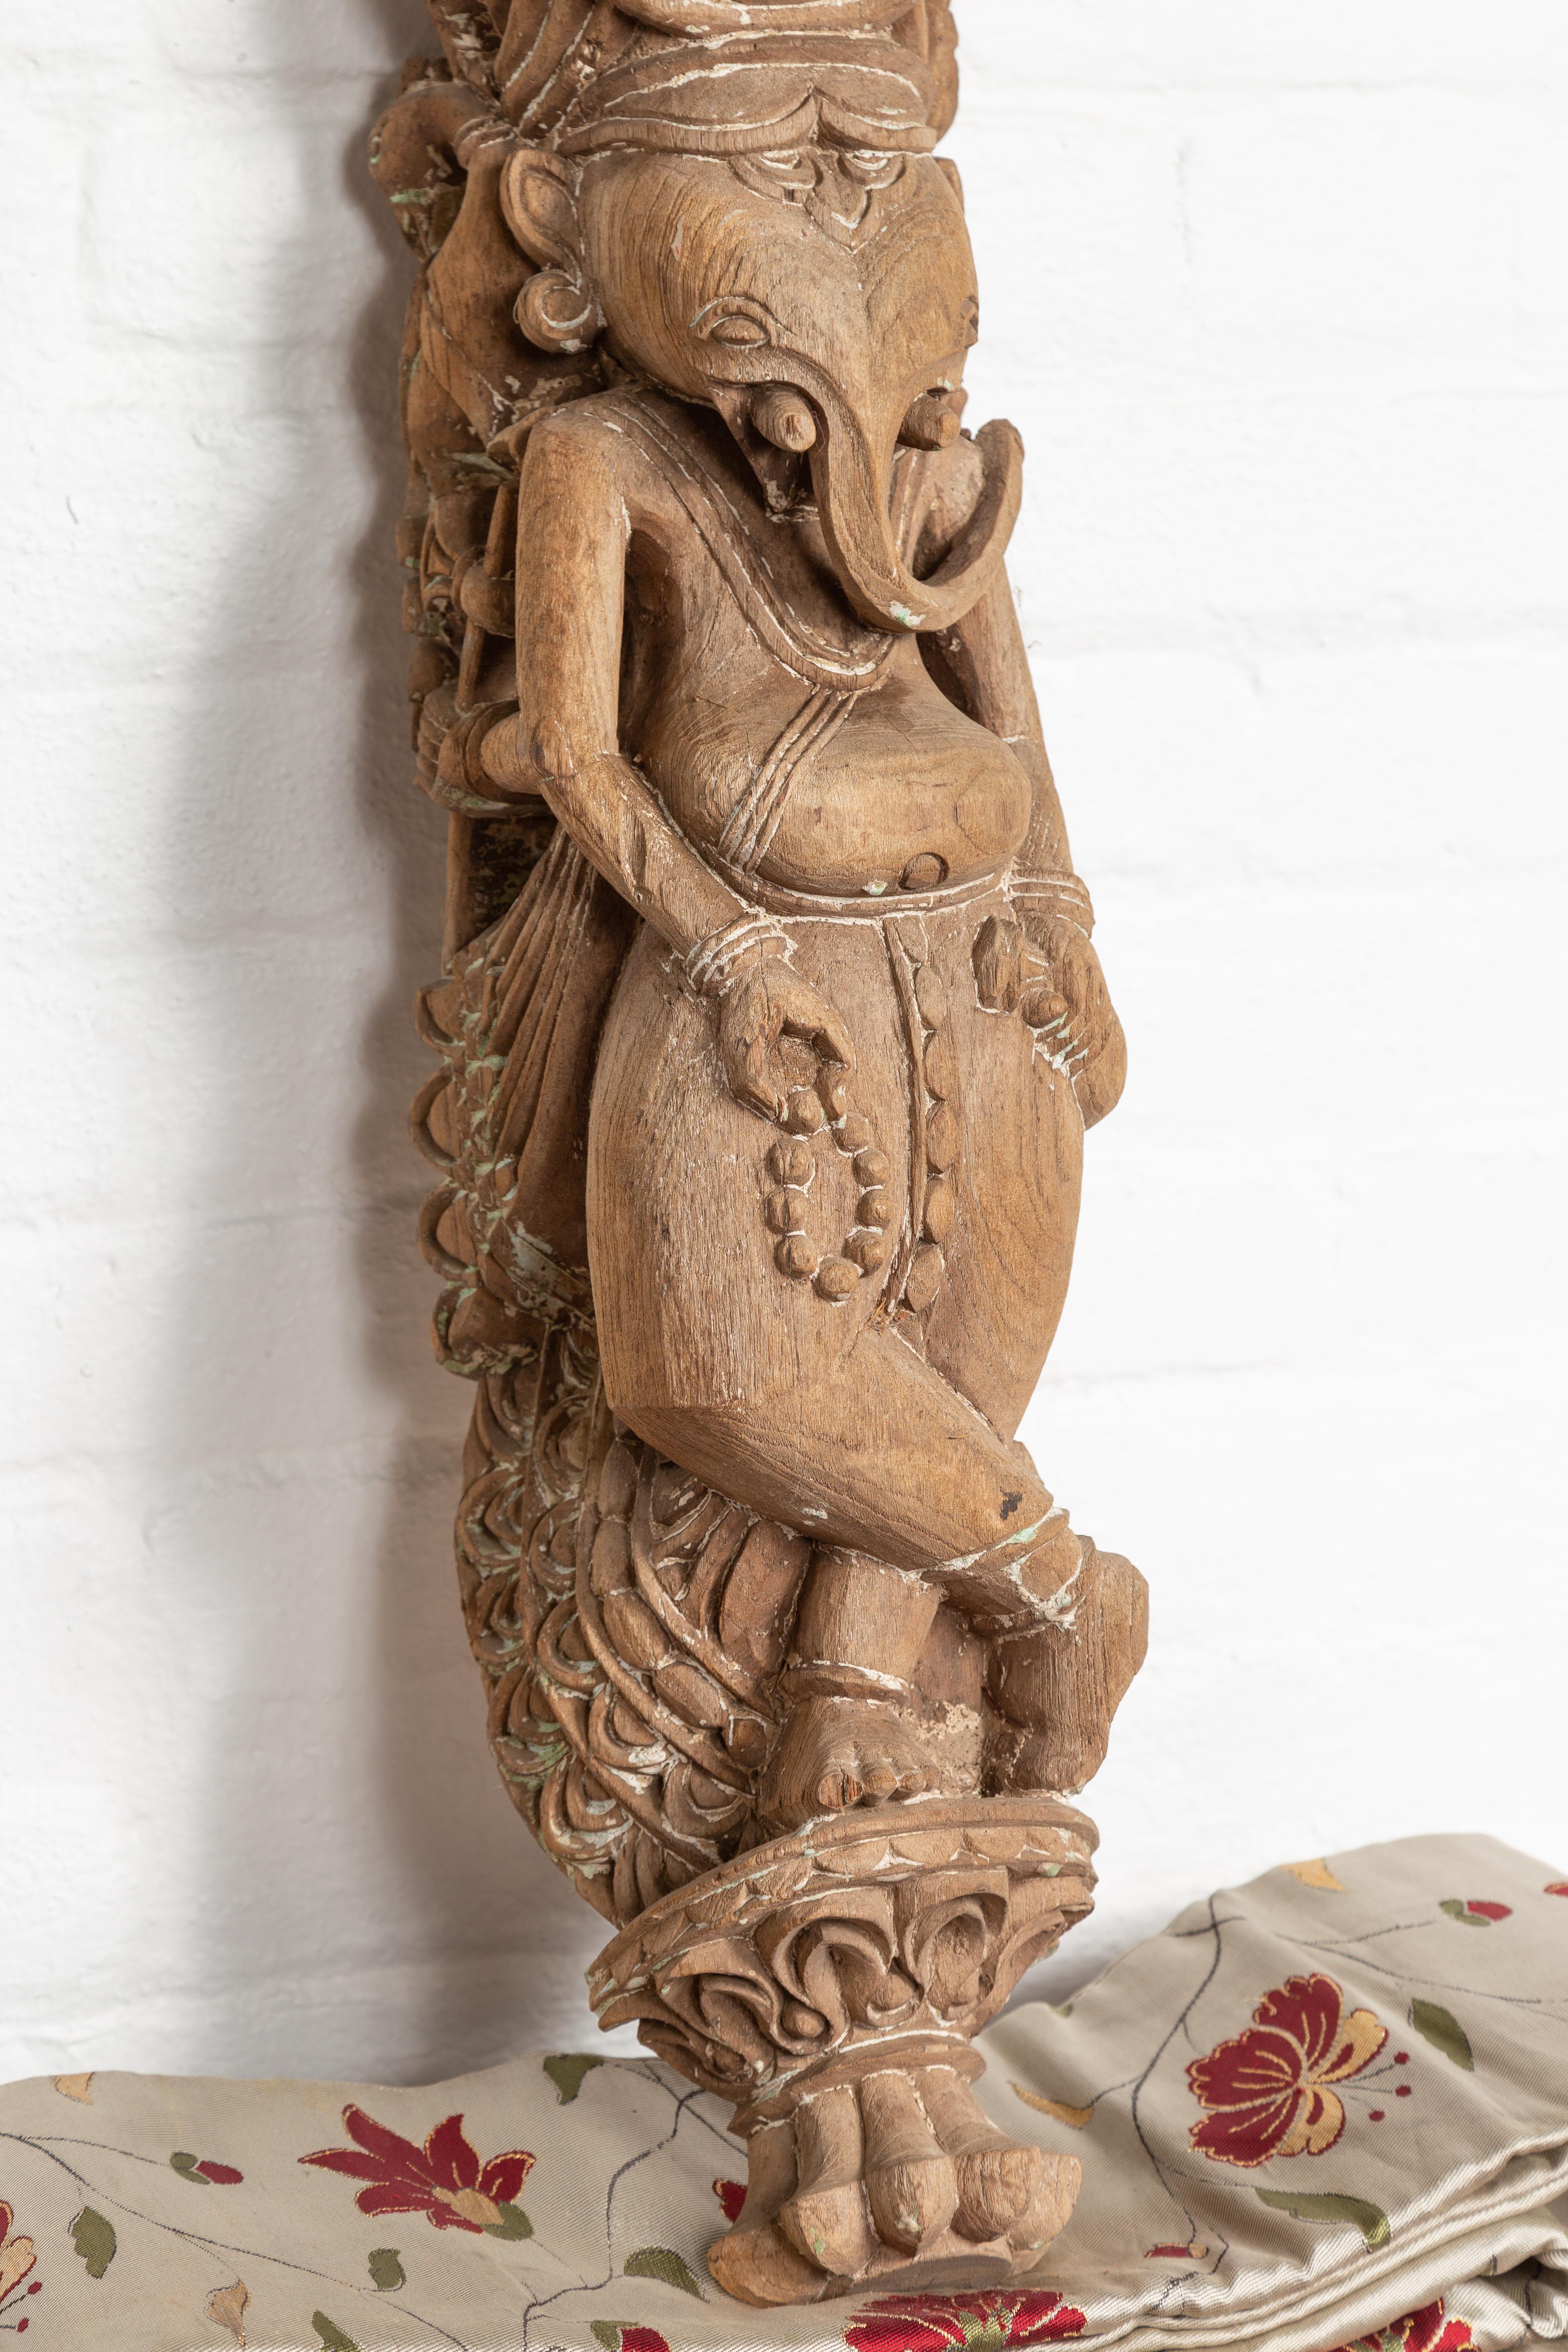 Wood Hand Carved Indian Temple Carving from Gujarat Depicting the Hindu Deity Ganesha